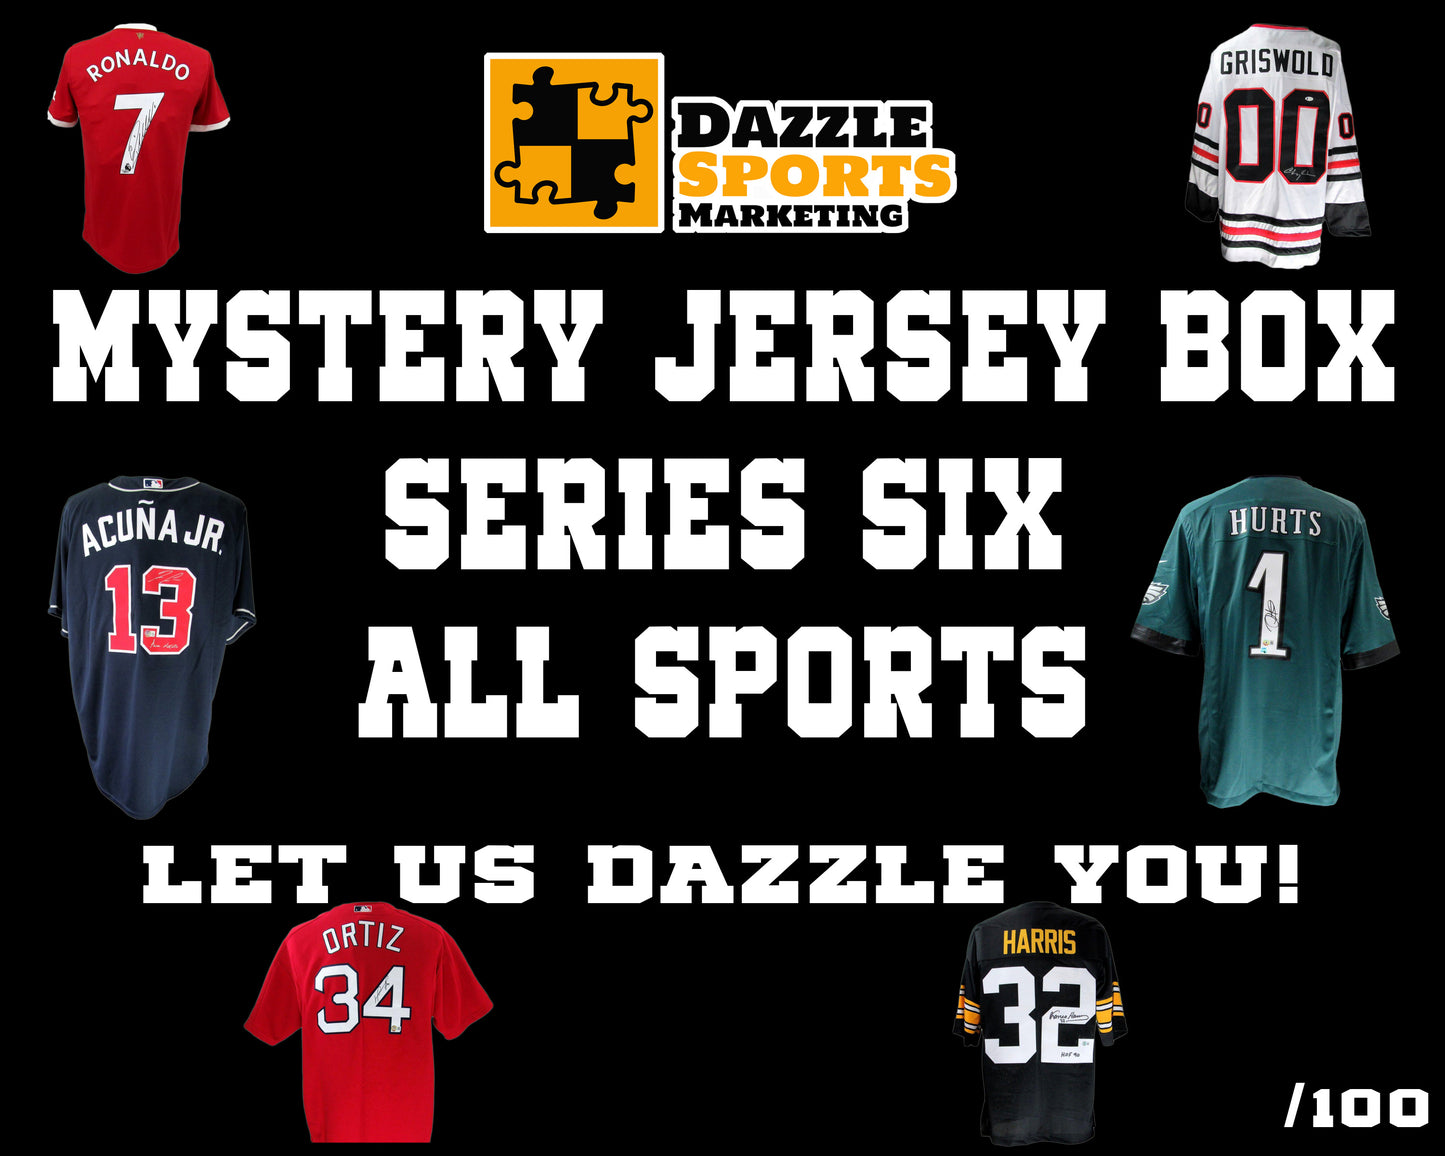 Mystery jersey box Series 6 - All Sports